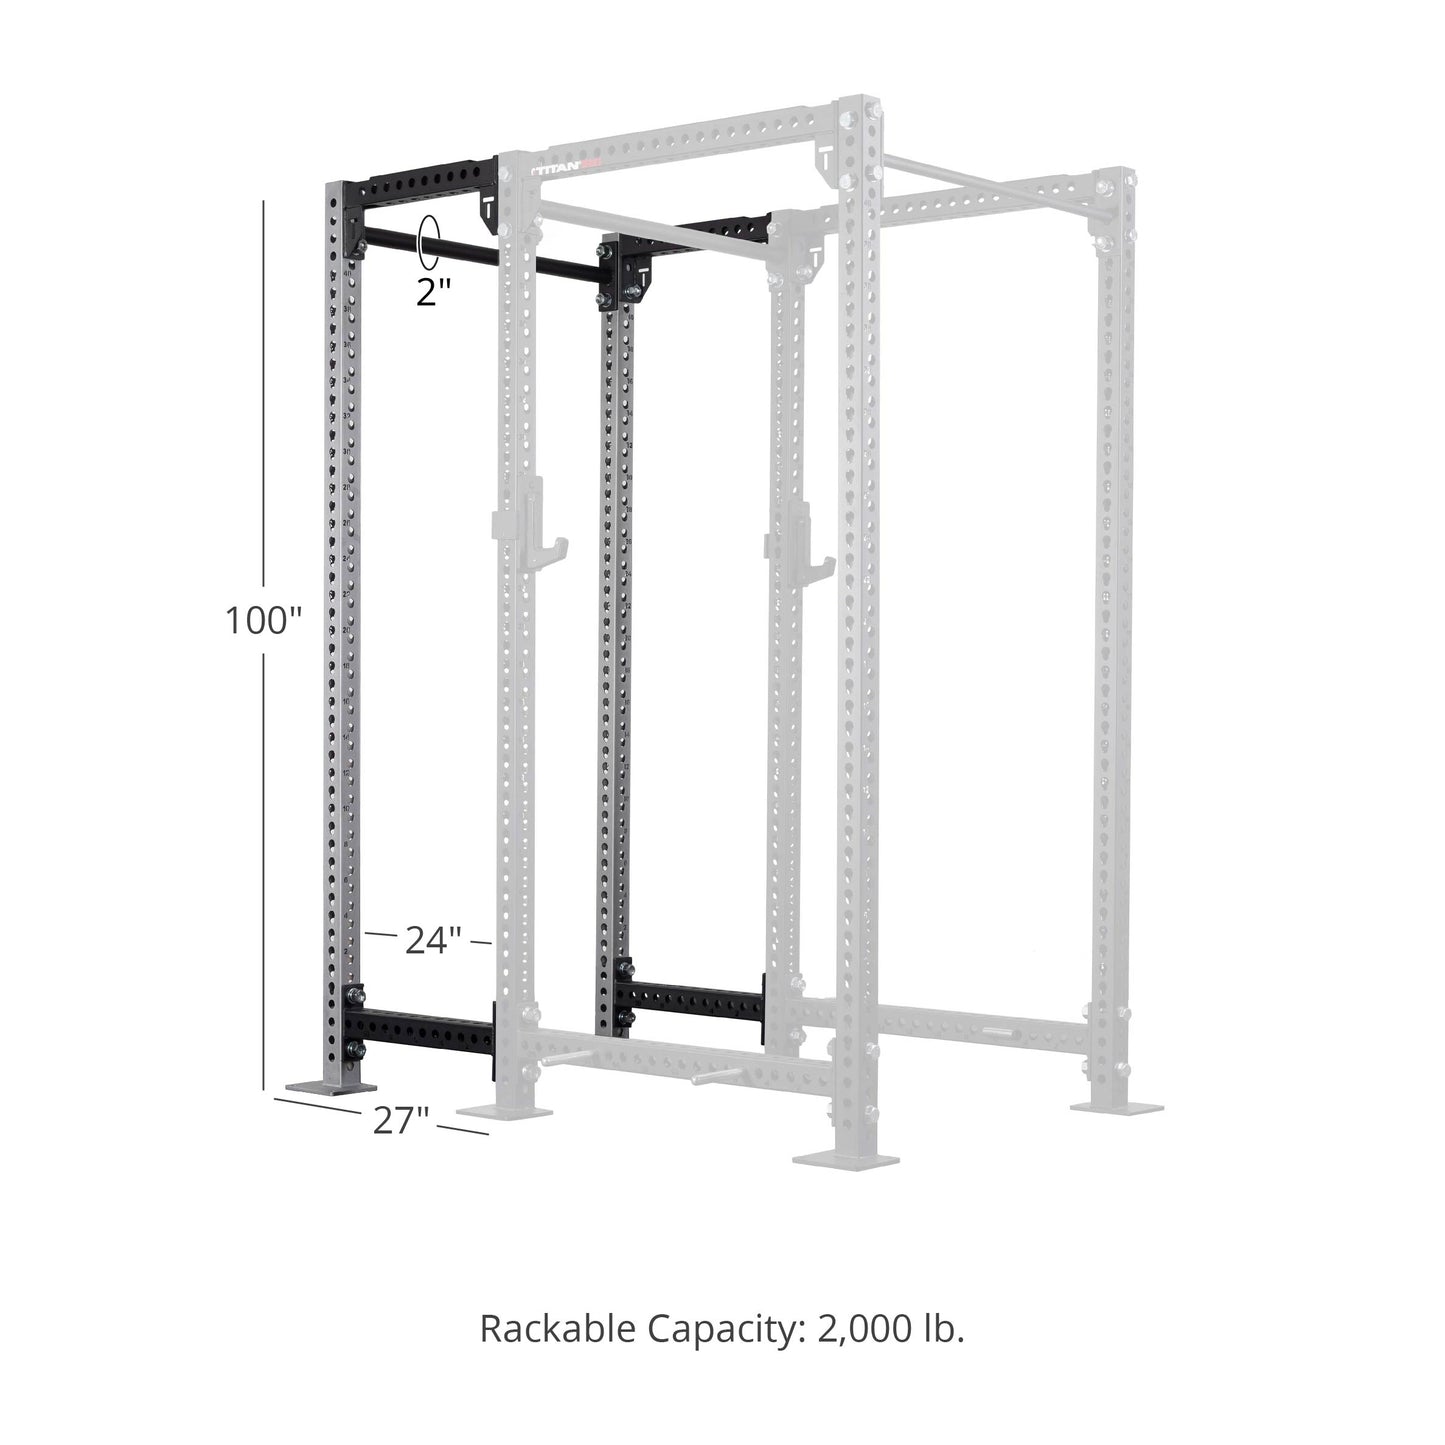 TITAN Series 24" Extension Kit - Extension Color: Silver - Extension Height: 100" - Crossmember: 2" Fat Pull-Up Bar | Silver / 100" / 2" Fat Pull-Up Bar - view 194